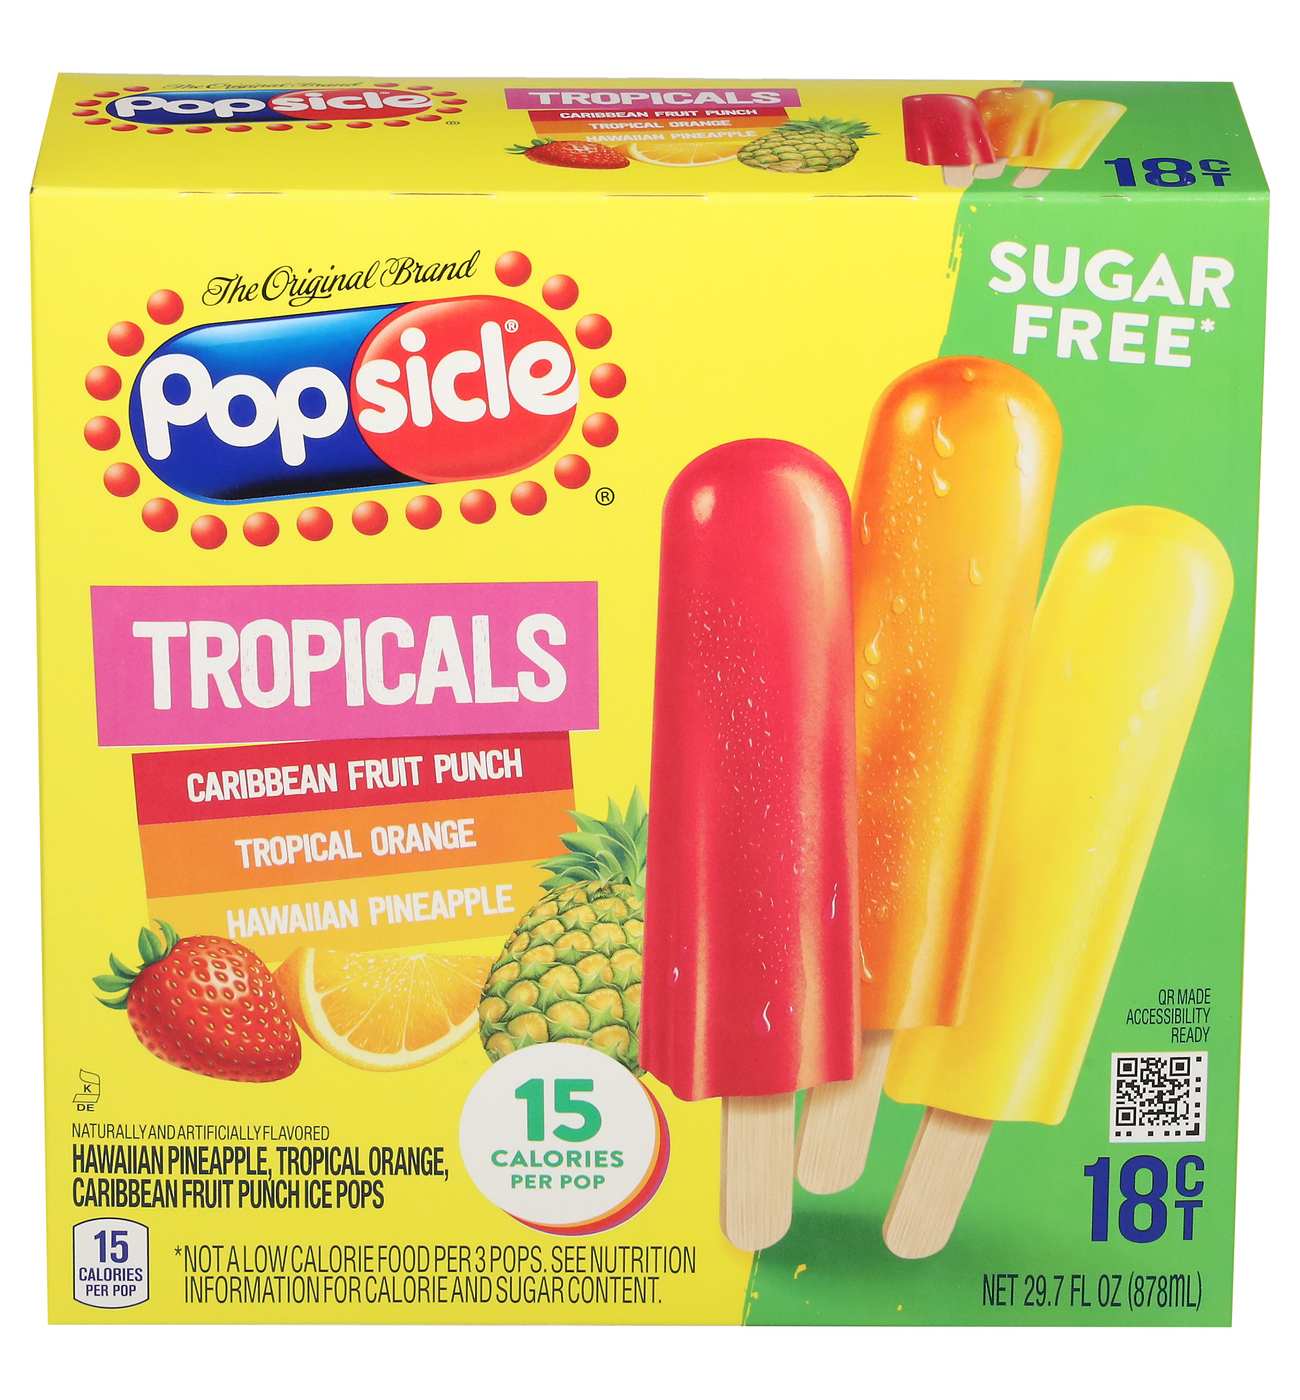 Popsicle Tropicals Ice Pops; image 1 of 2